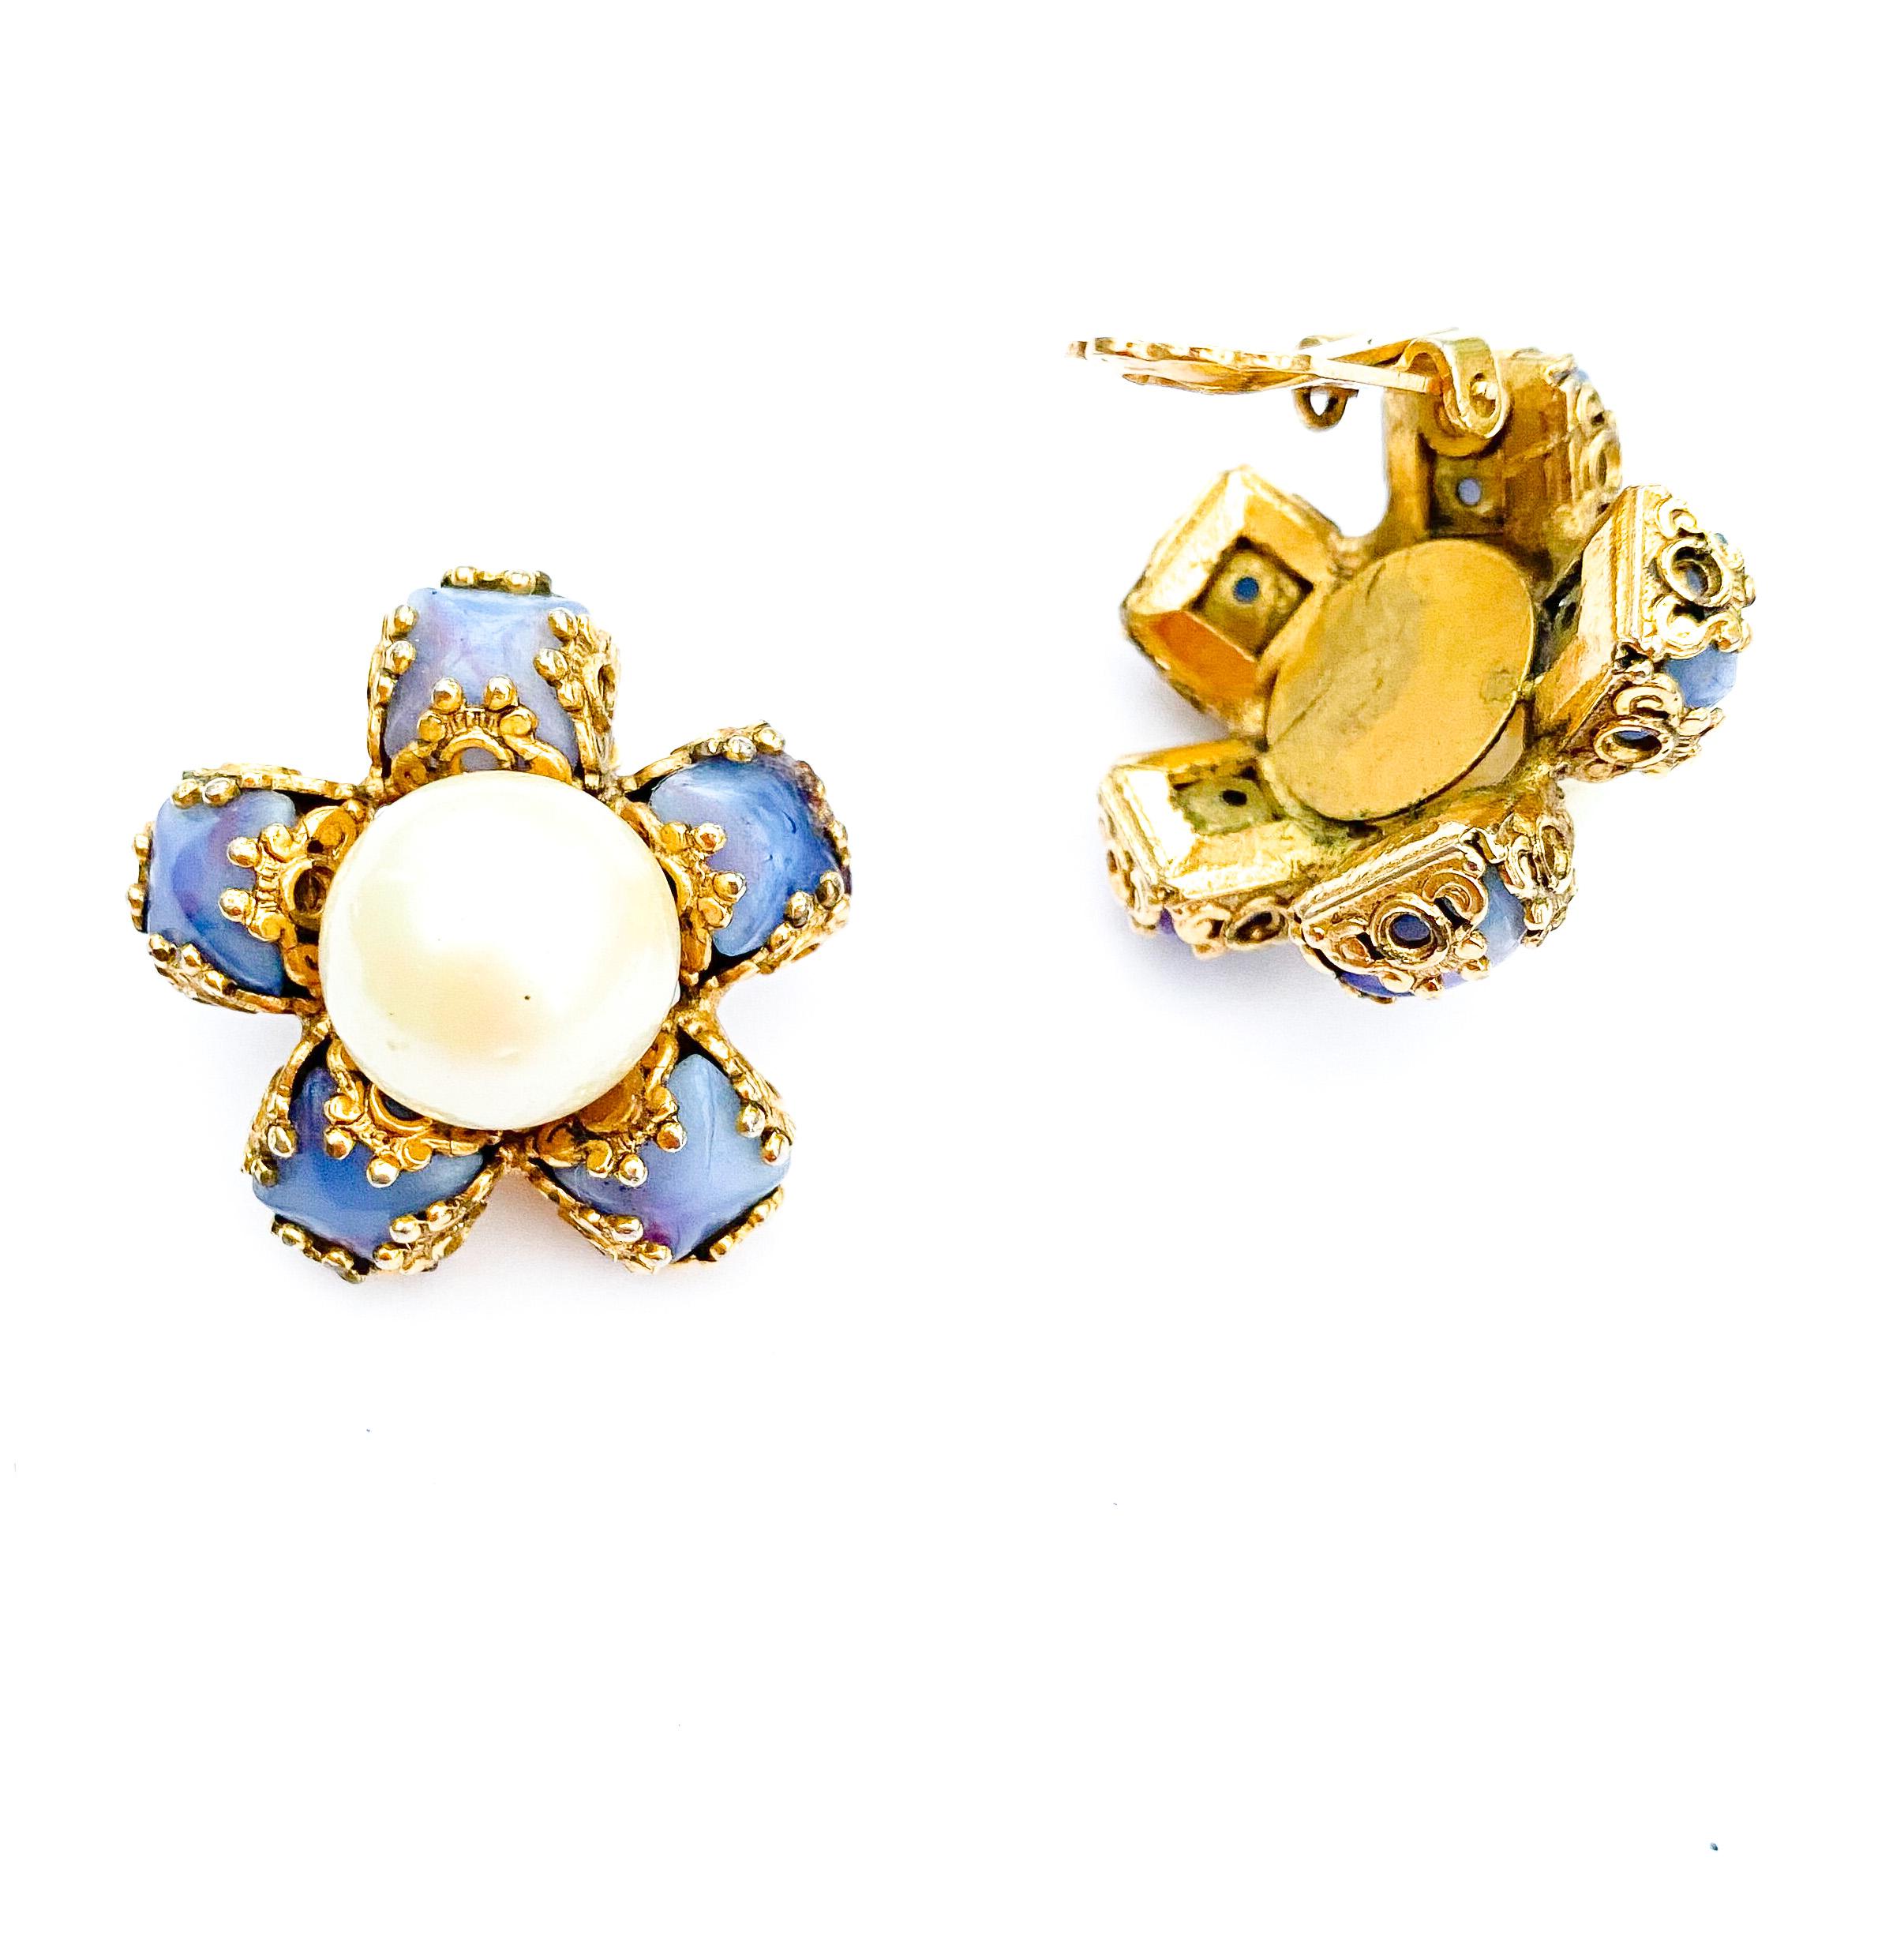 A striking pair of 'cruxiform earrings, of excellent quality and weight. Very much in the style of Chanel of this period (1960s) , they sadly are not signed, but they bear all the qualities and motifs of Maison Goossens, creator and collaborator